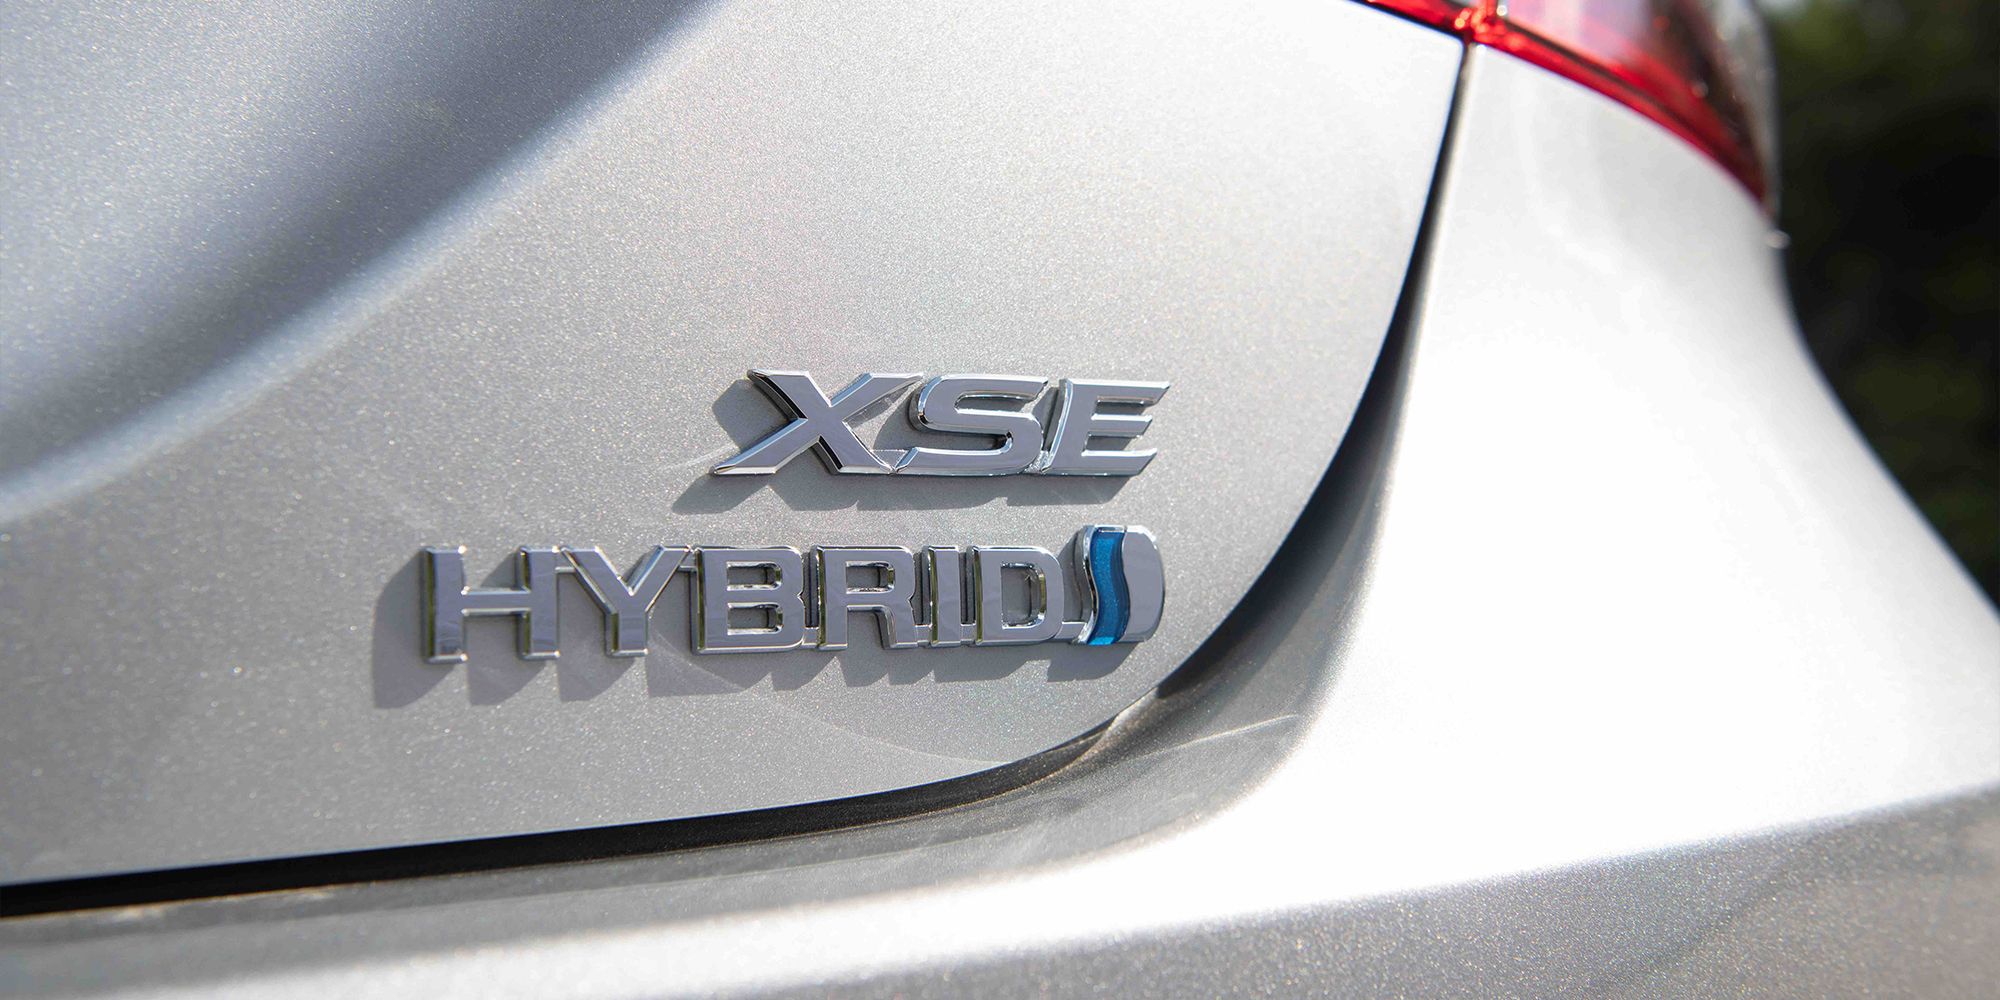 The trunk badge on the Camry XSE Hybrid